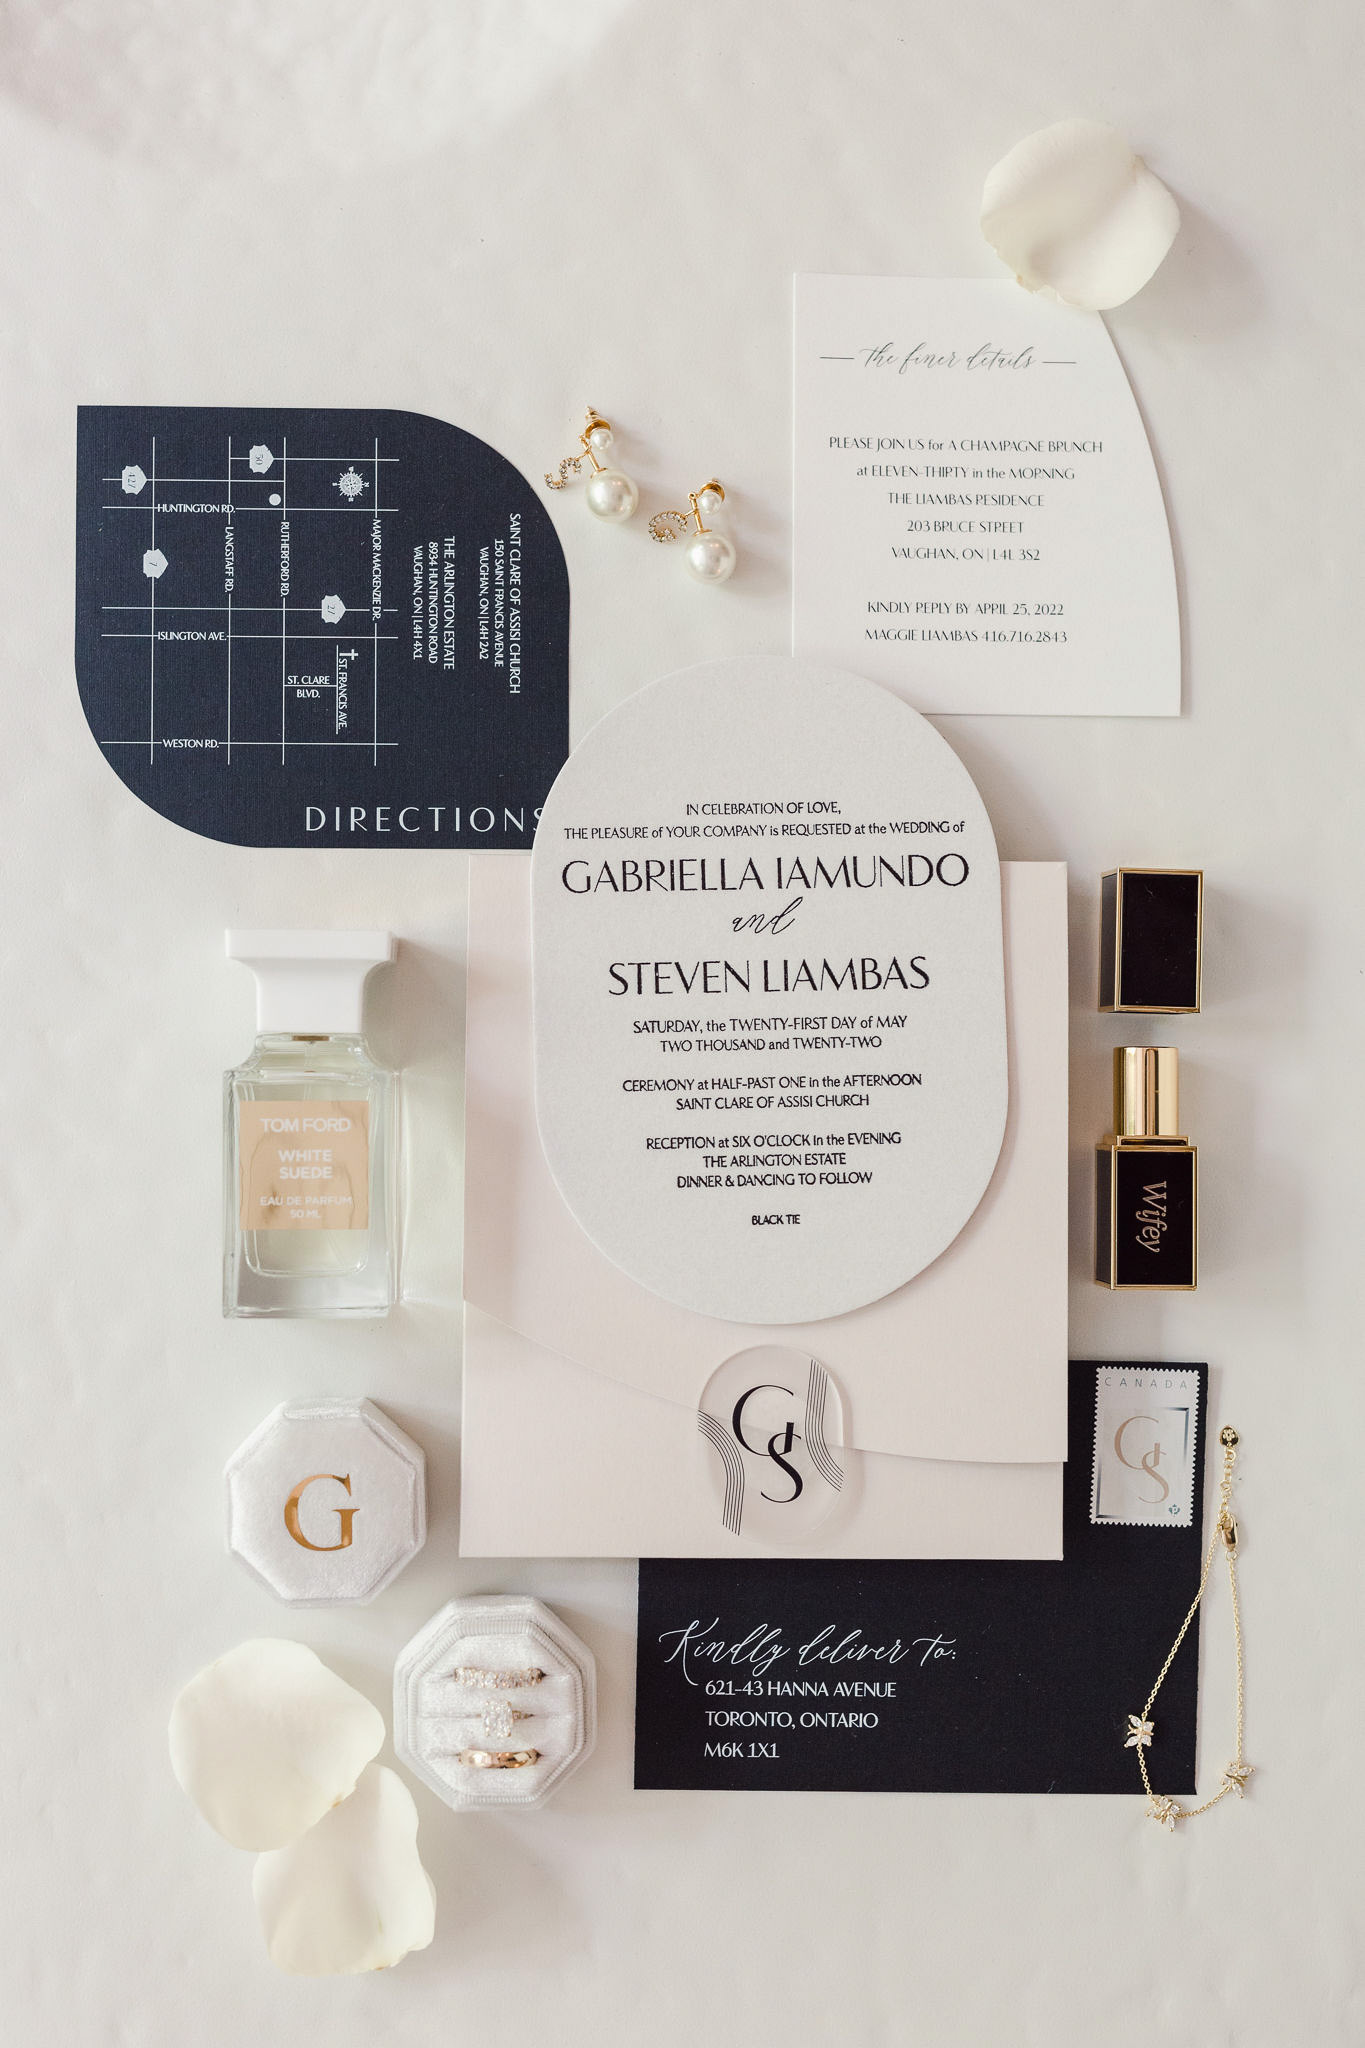 Black and white wedding invitations and accessories.